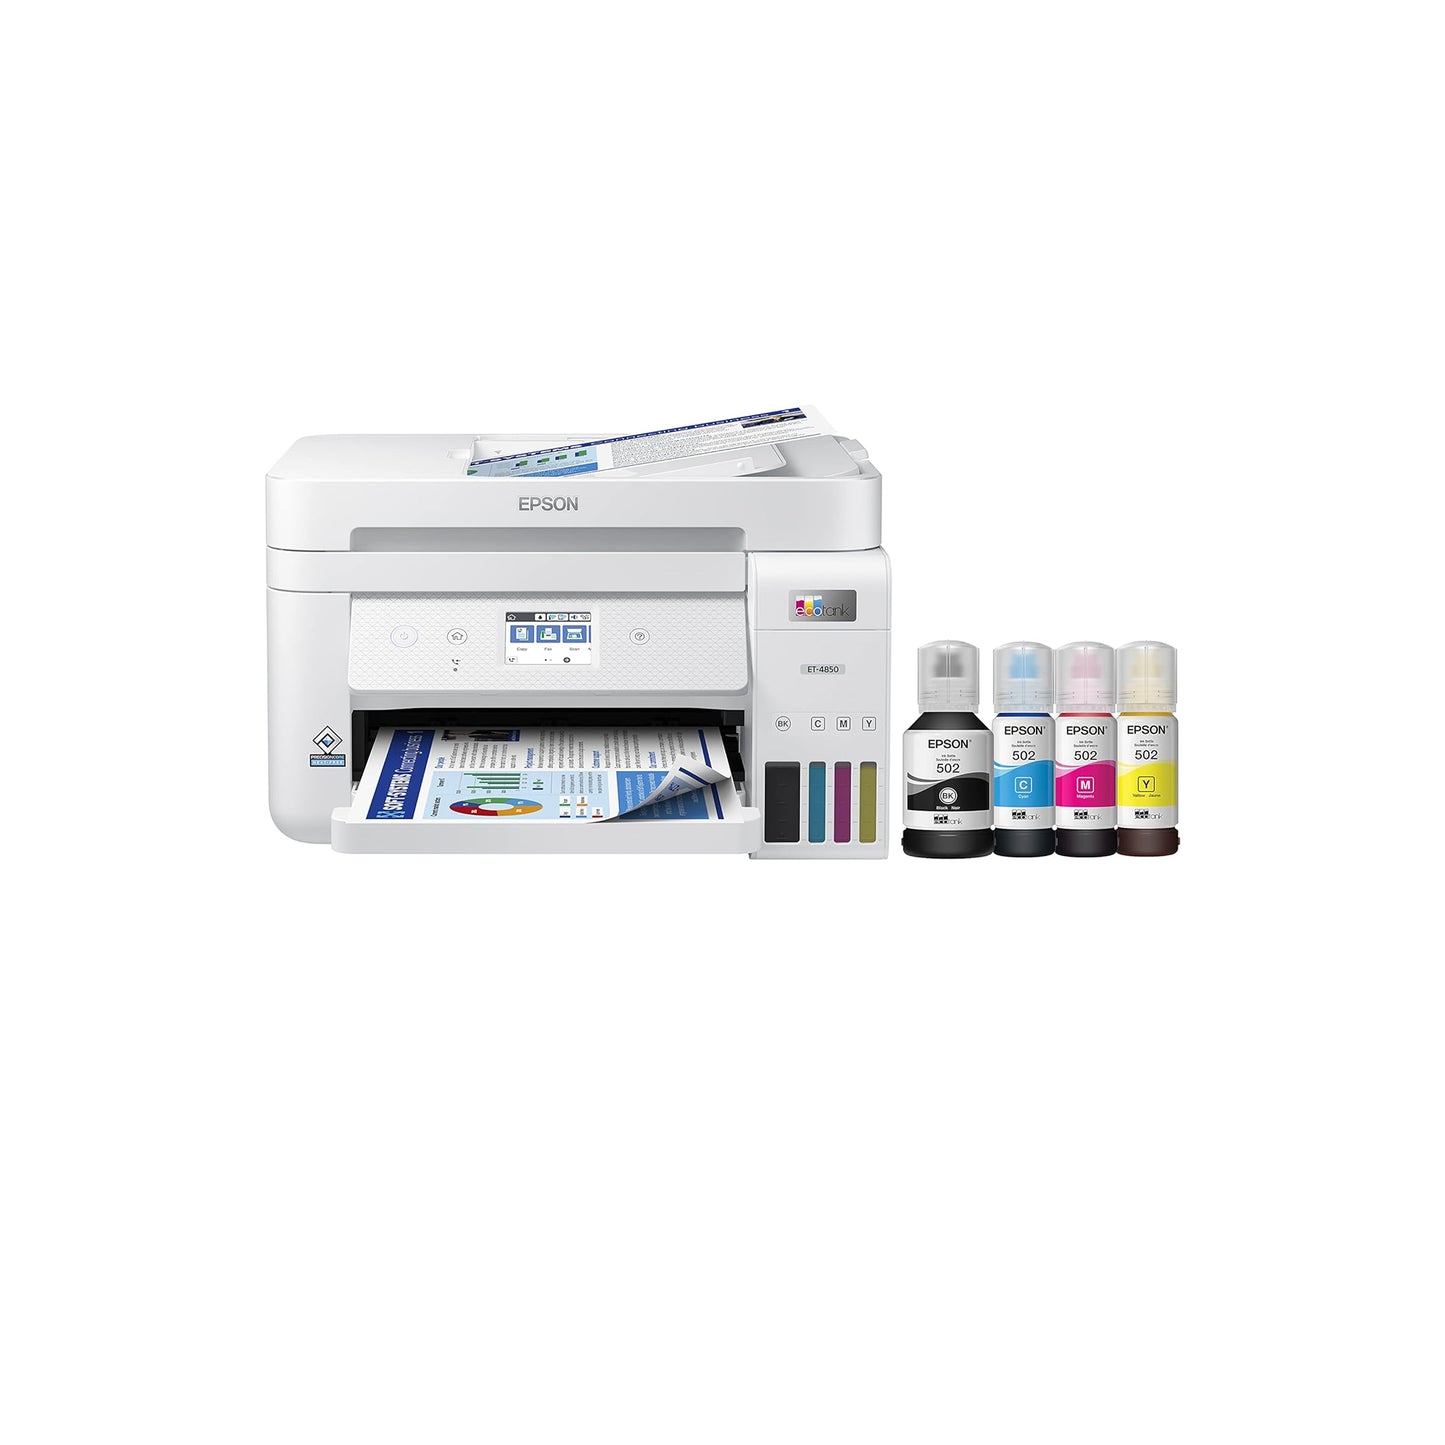 Epson EcoTank ET-4850 Wireless All-in-One Cartridge-Free Supertank Printer with Scanner, Copier, Fax, ADF and Ethernet – The Perfect Printer Office - White, Medium